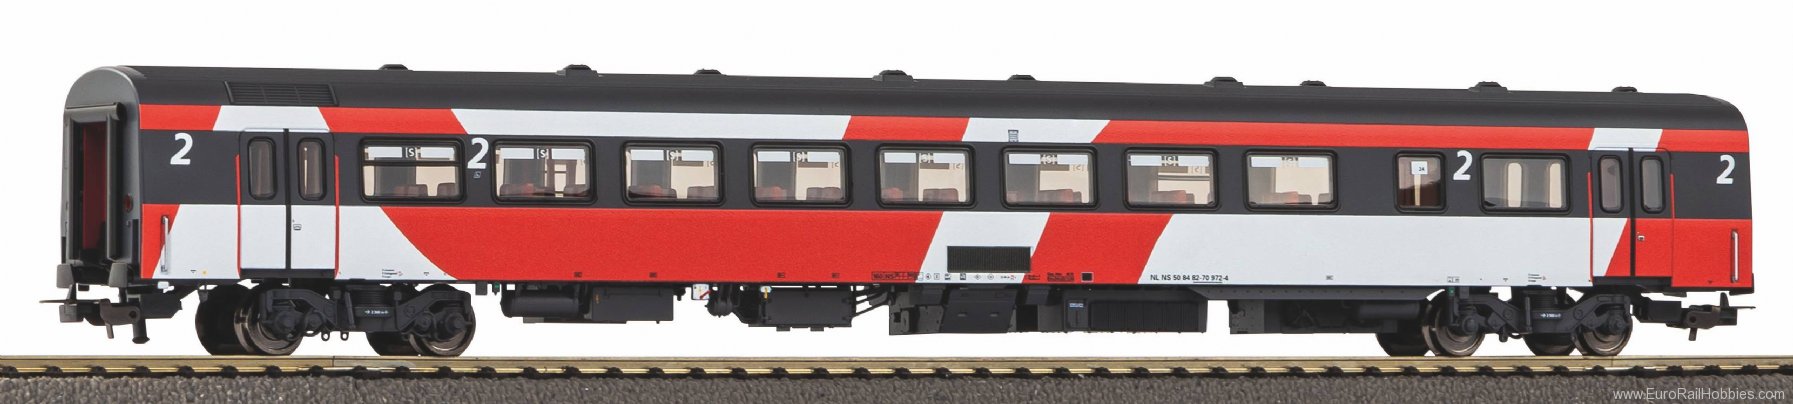 Piko 97636 2nd class ICR passenger coach with luggage co